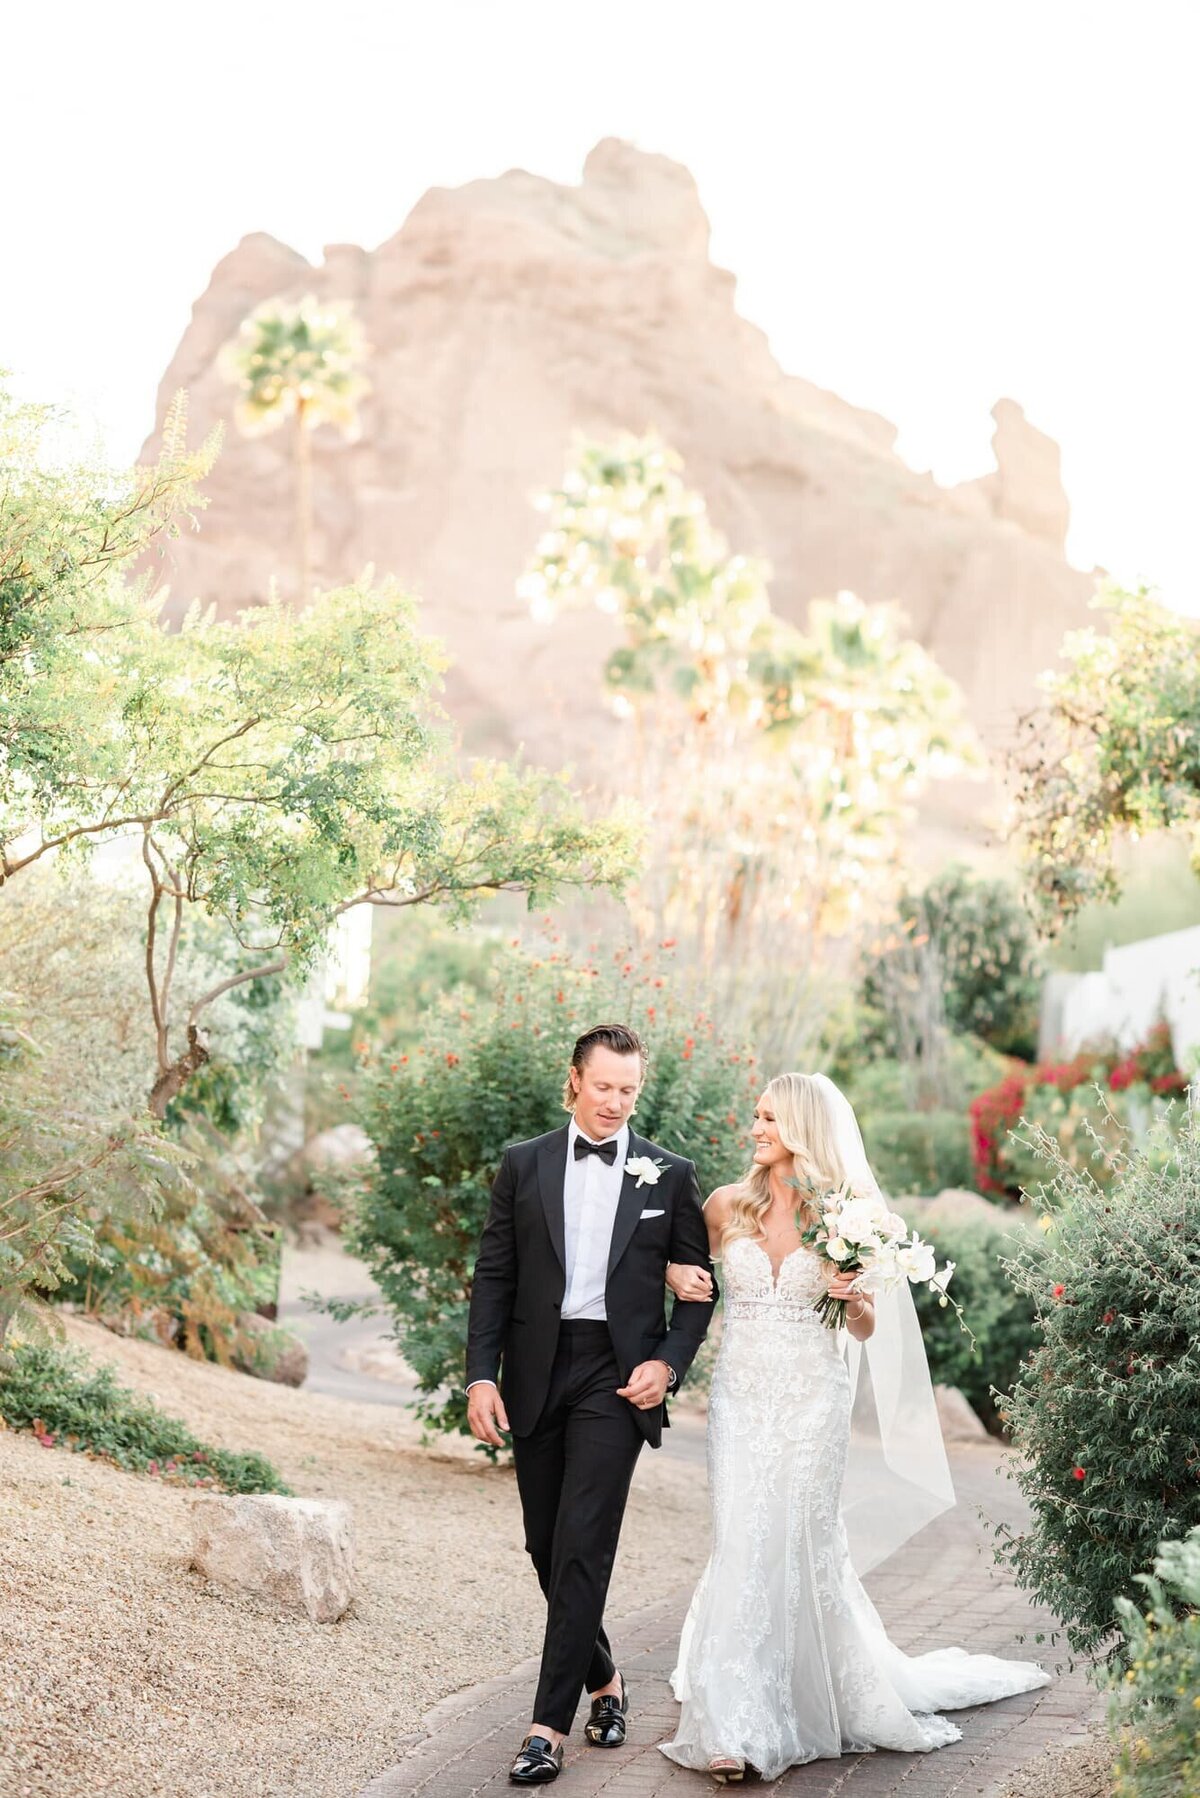 Wedding-At-THe-Sactuary-Scottsdale-Joy-And-Ben-Photograpy-1